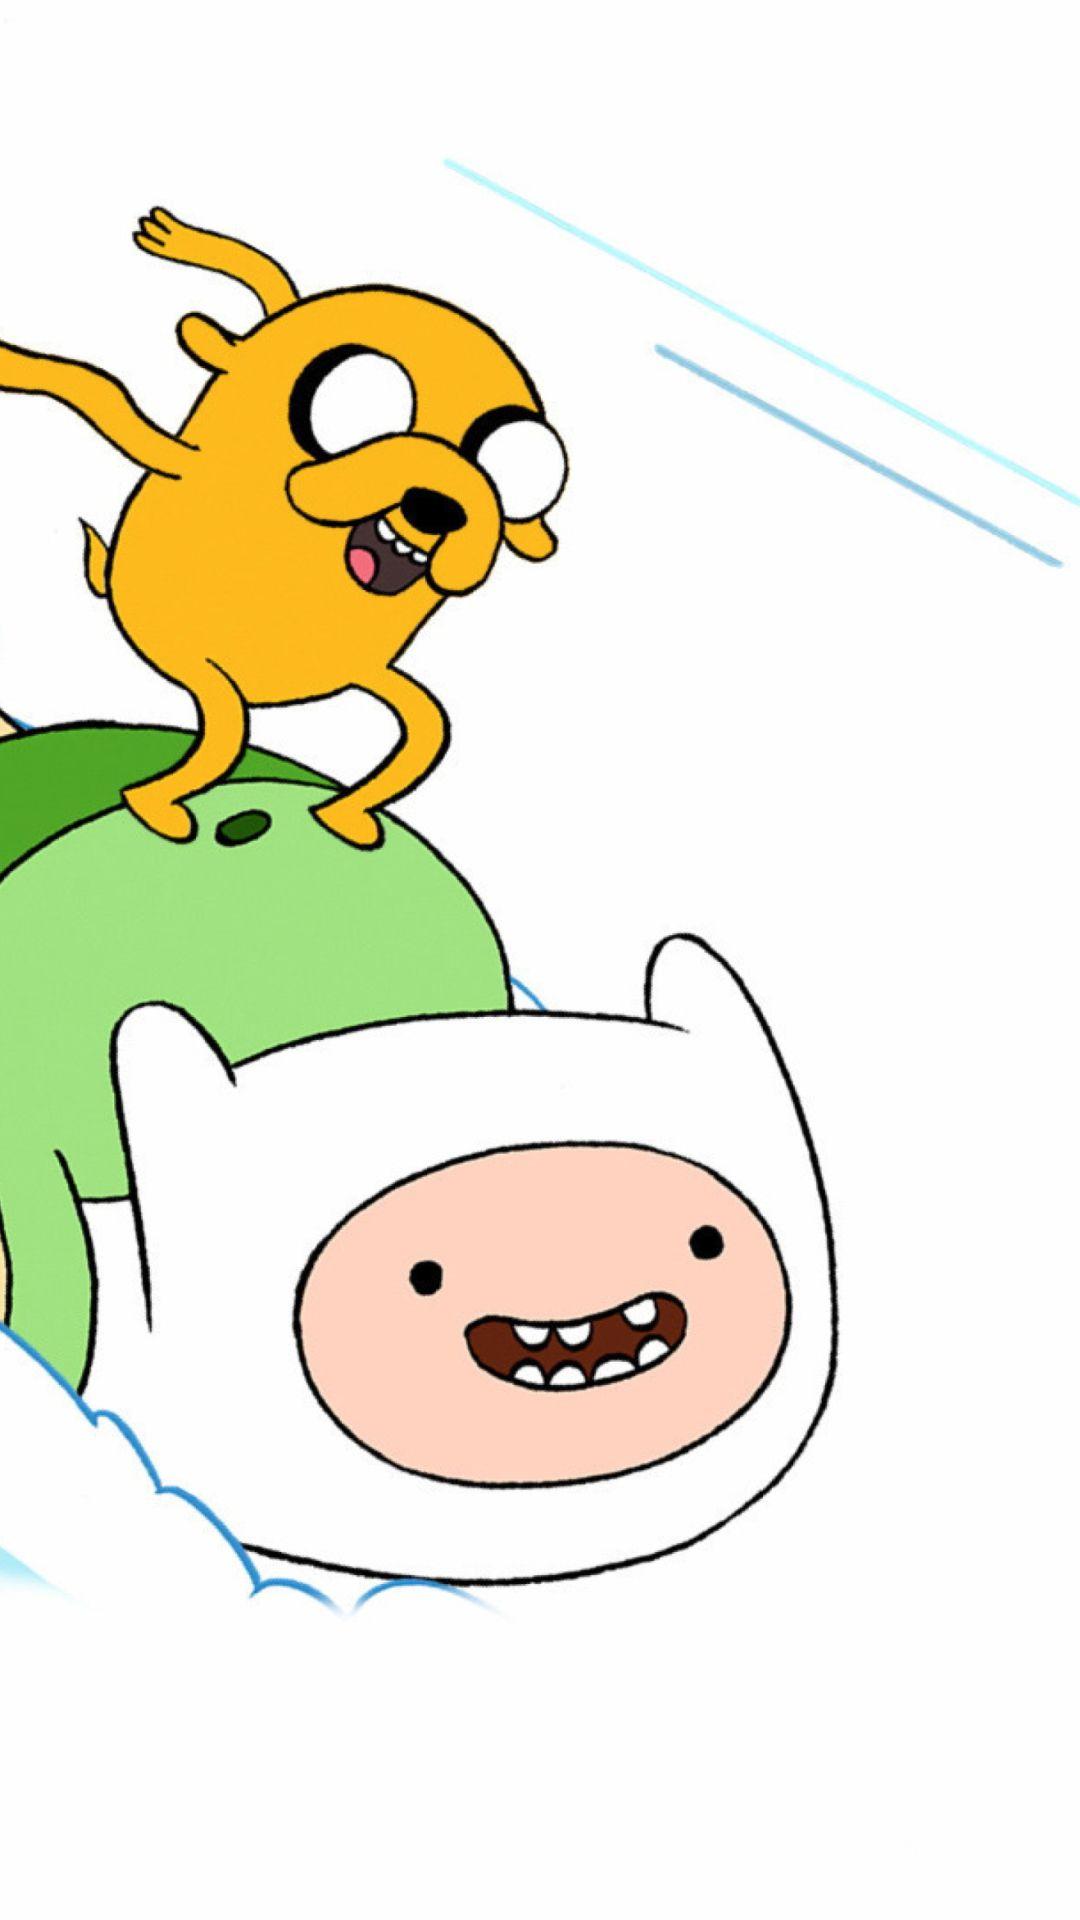 Wallpaper.wiki Finn And Jake Adventure Time IPhone Wallpaper PIC